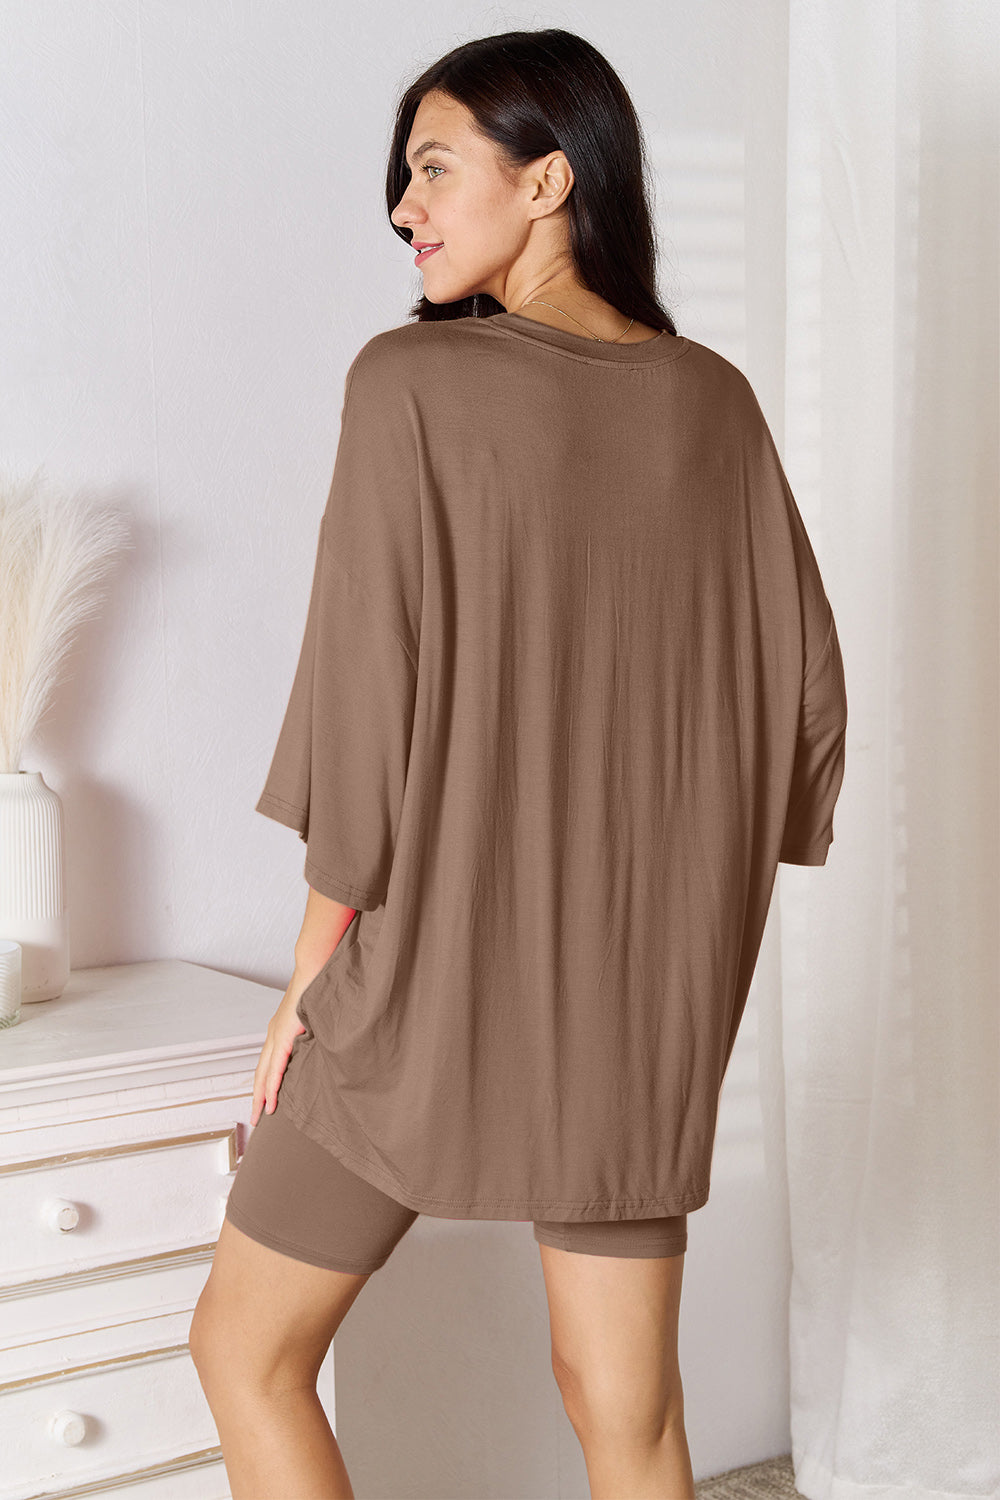 Basic Bae Full Size Soft Rayon Three-Quarter Sleeve Top and Shorts Set - Three Bears Boutique